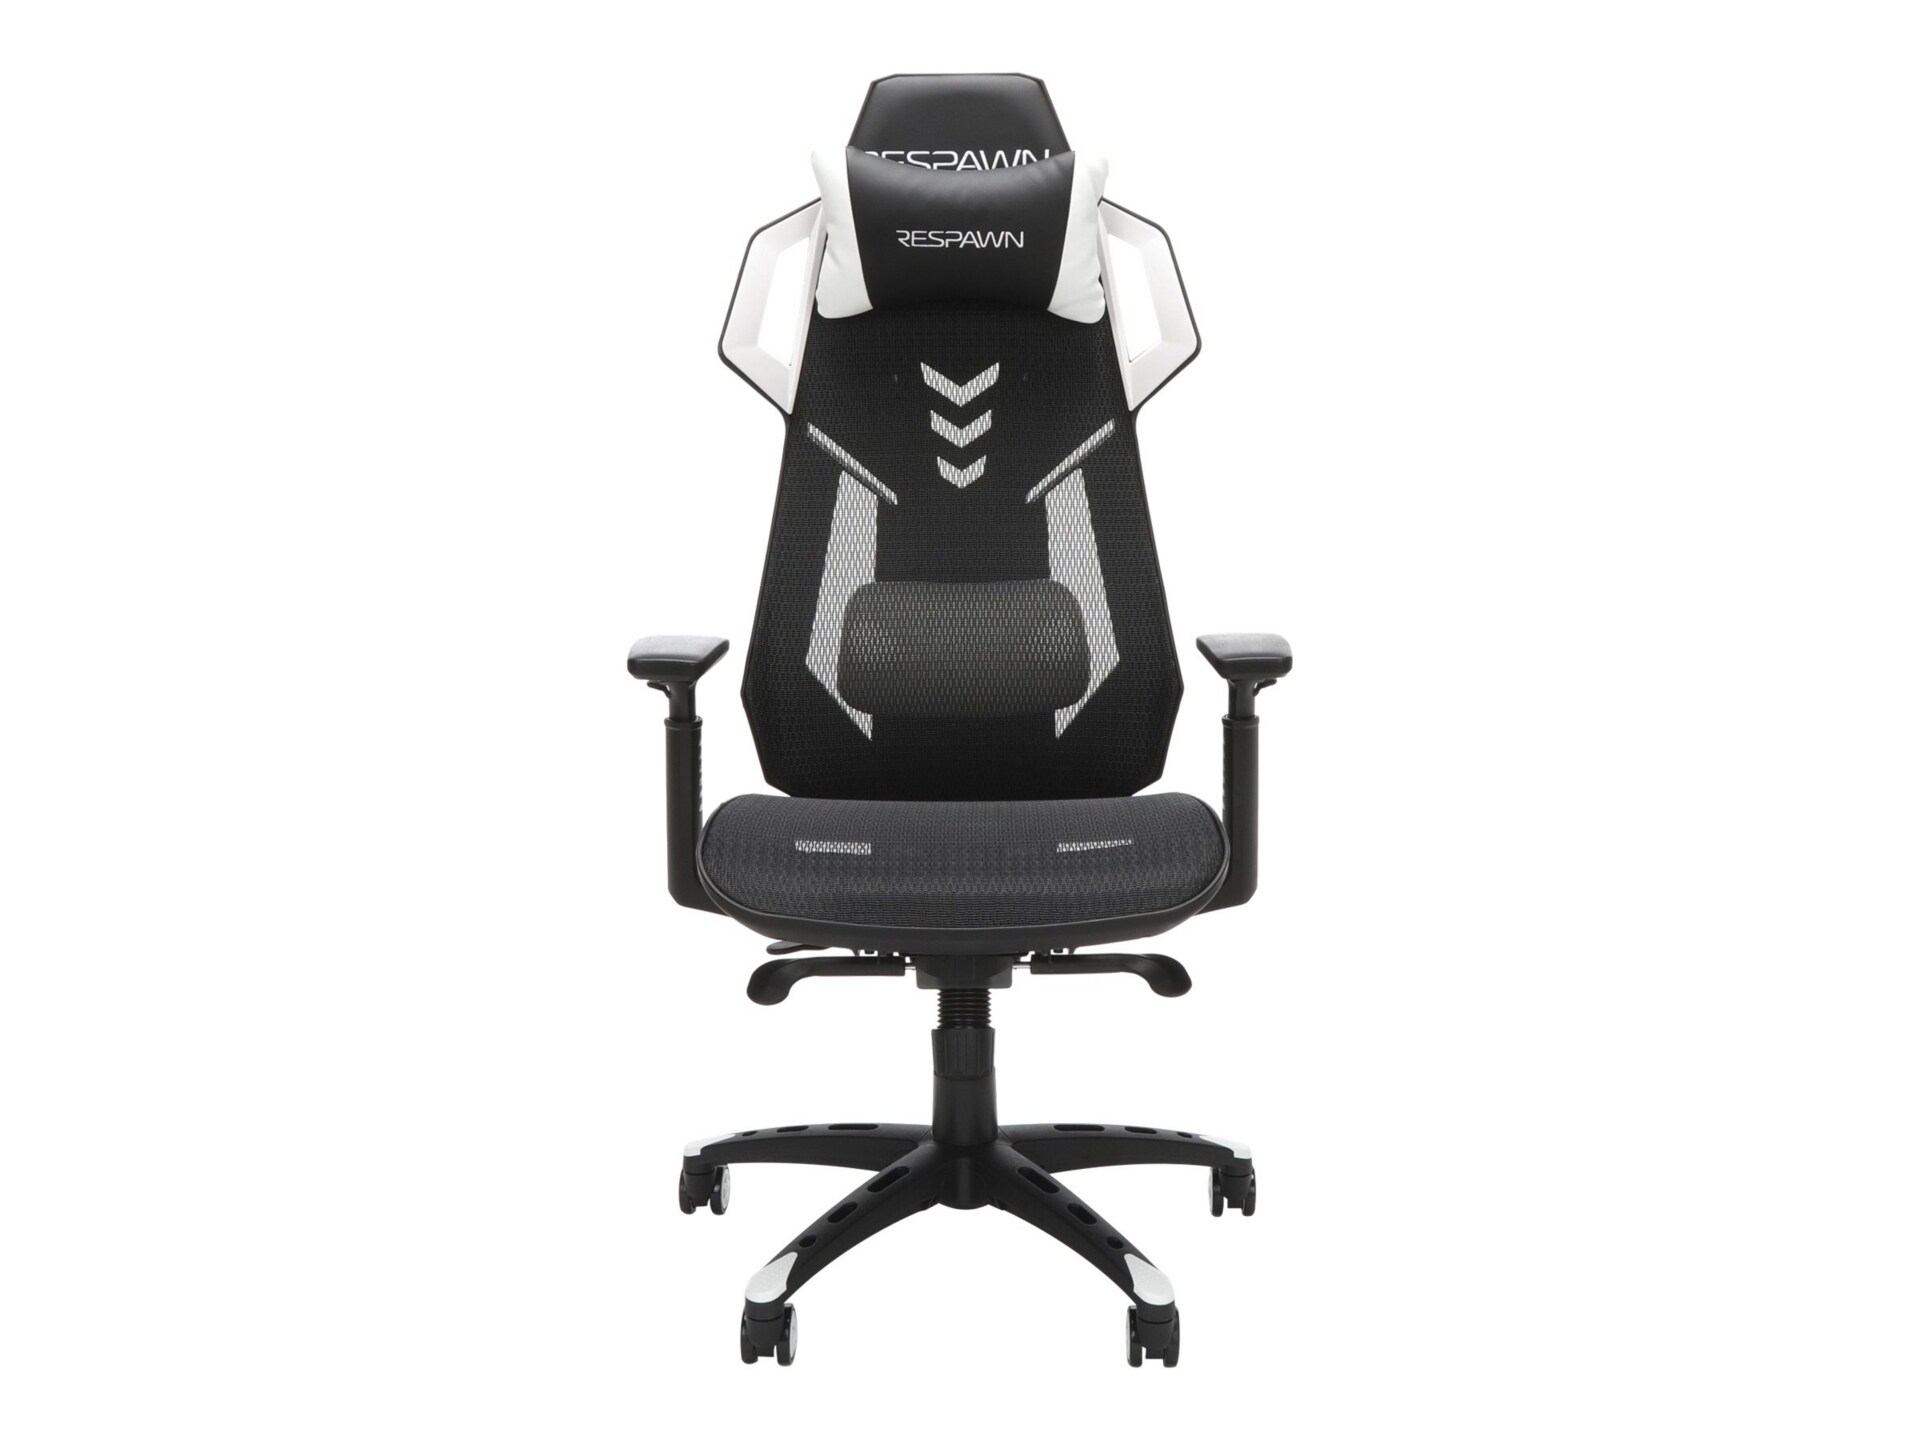 RESPAWN RSP-300 Racing Style 130deg. Reclining Gaming Chair - White